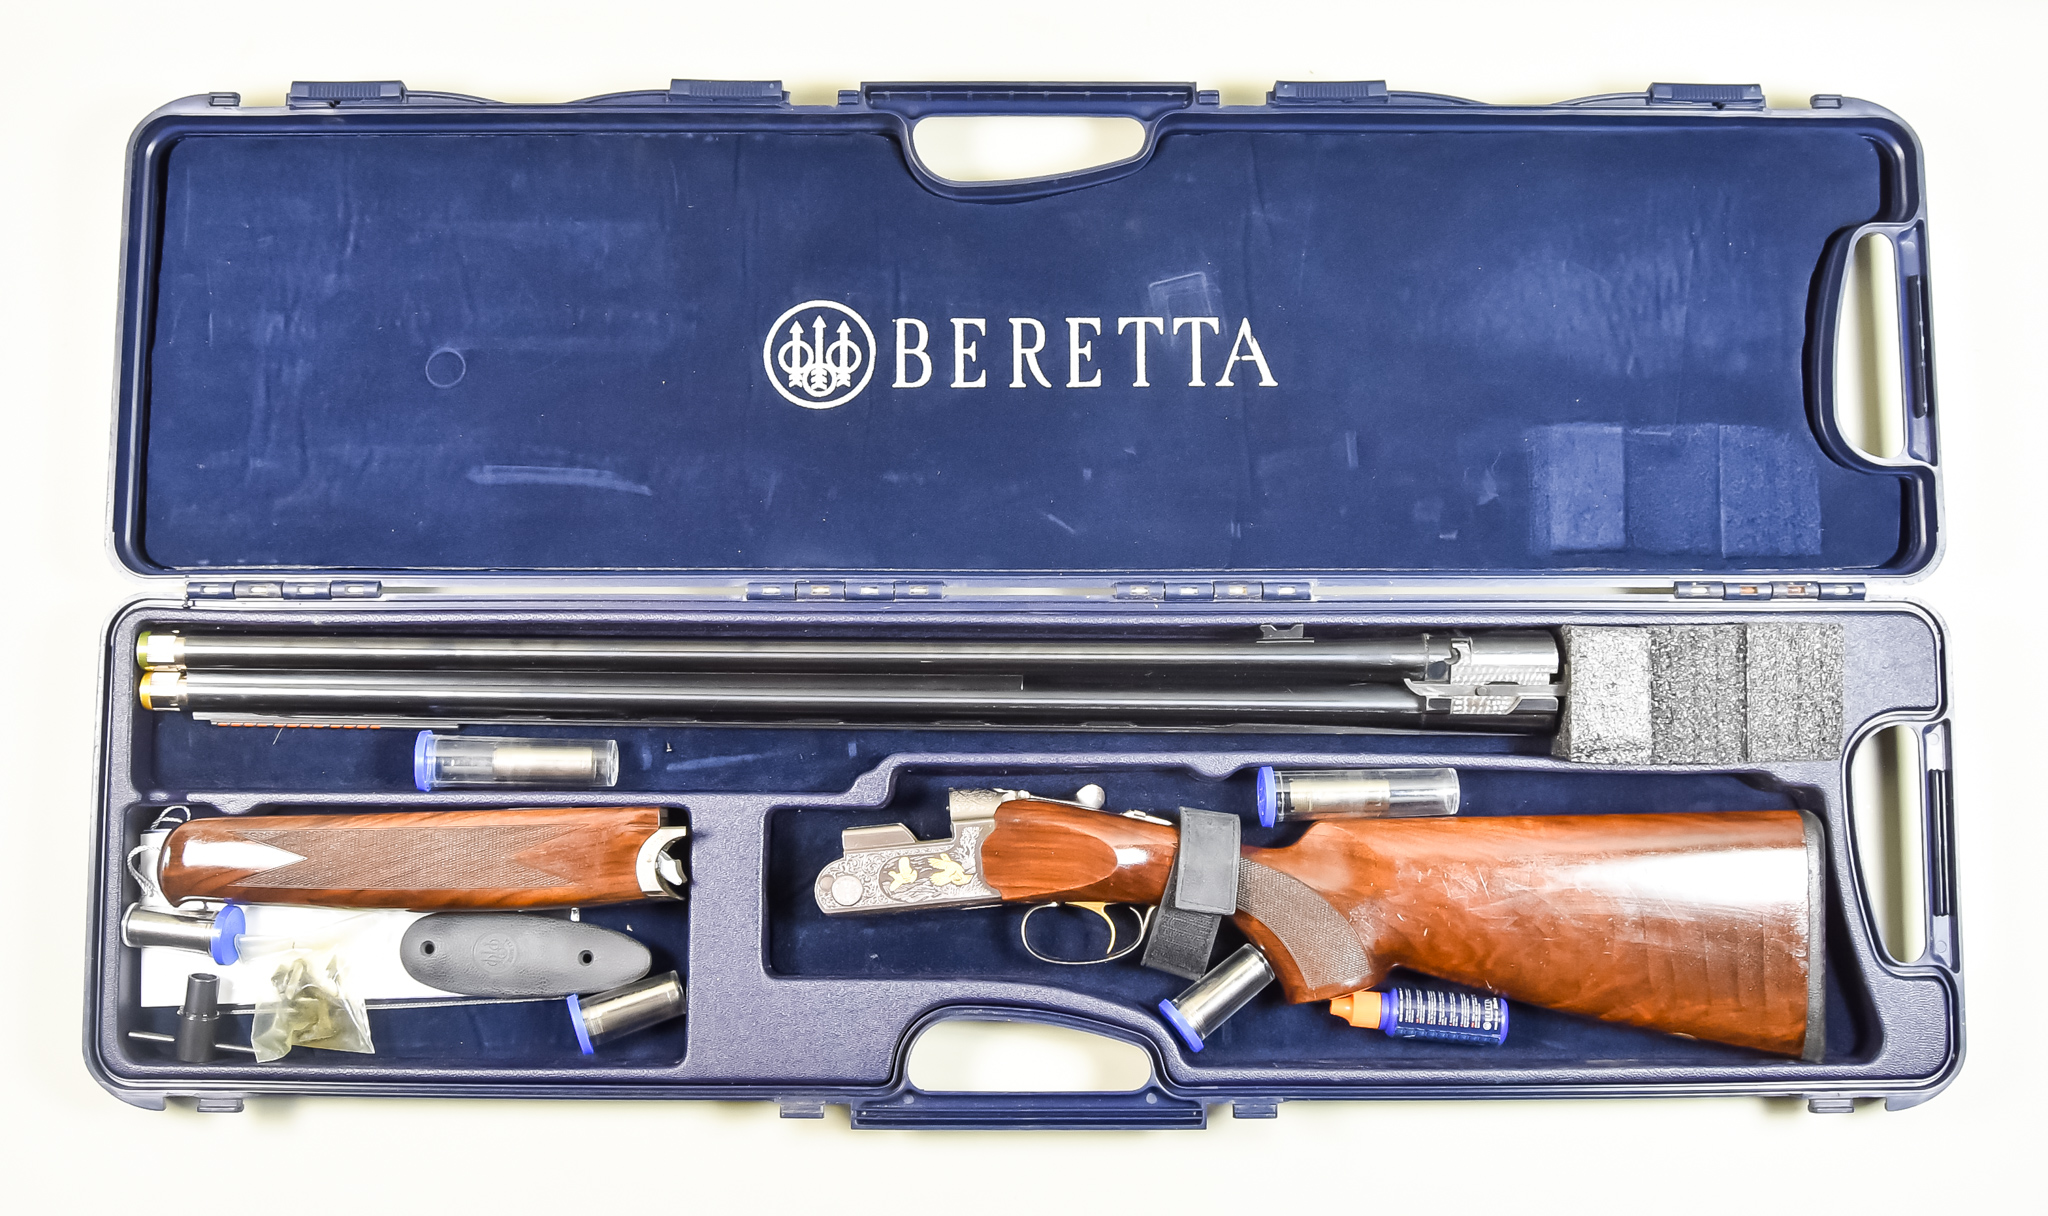 A 12 Bore Over and Under Shotgun by Beretta, Model Ultra Light Deluxe, serial no. U29620B, 28ins